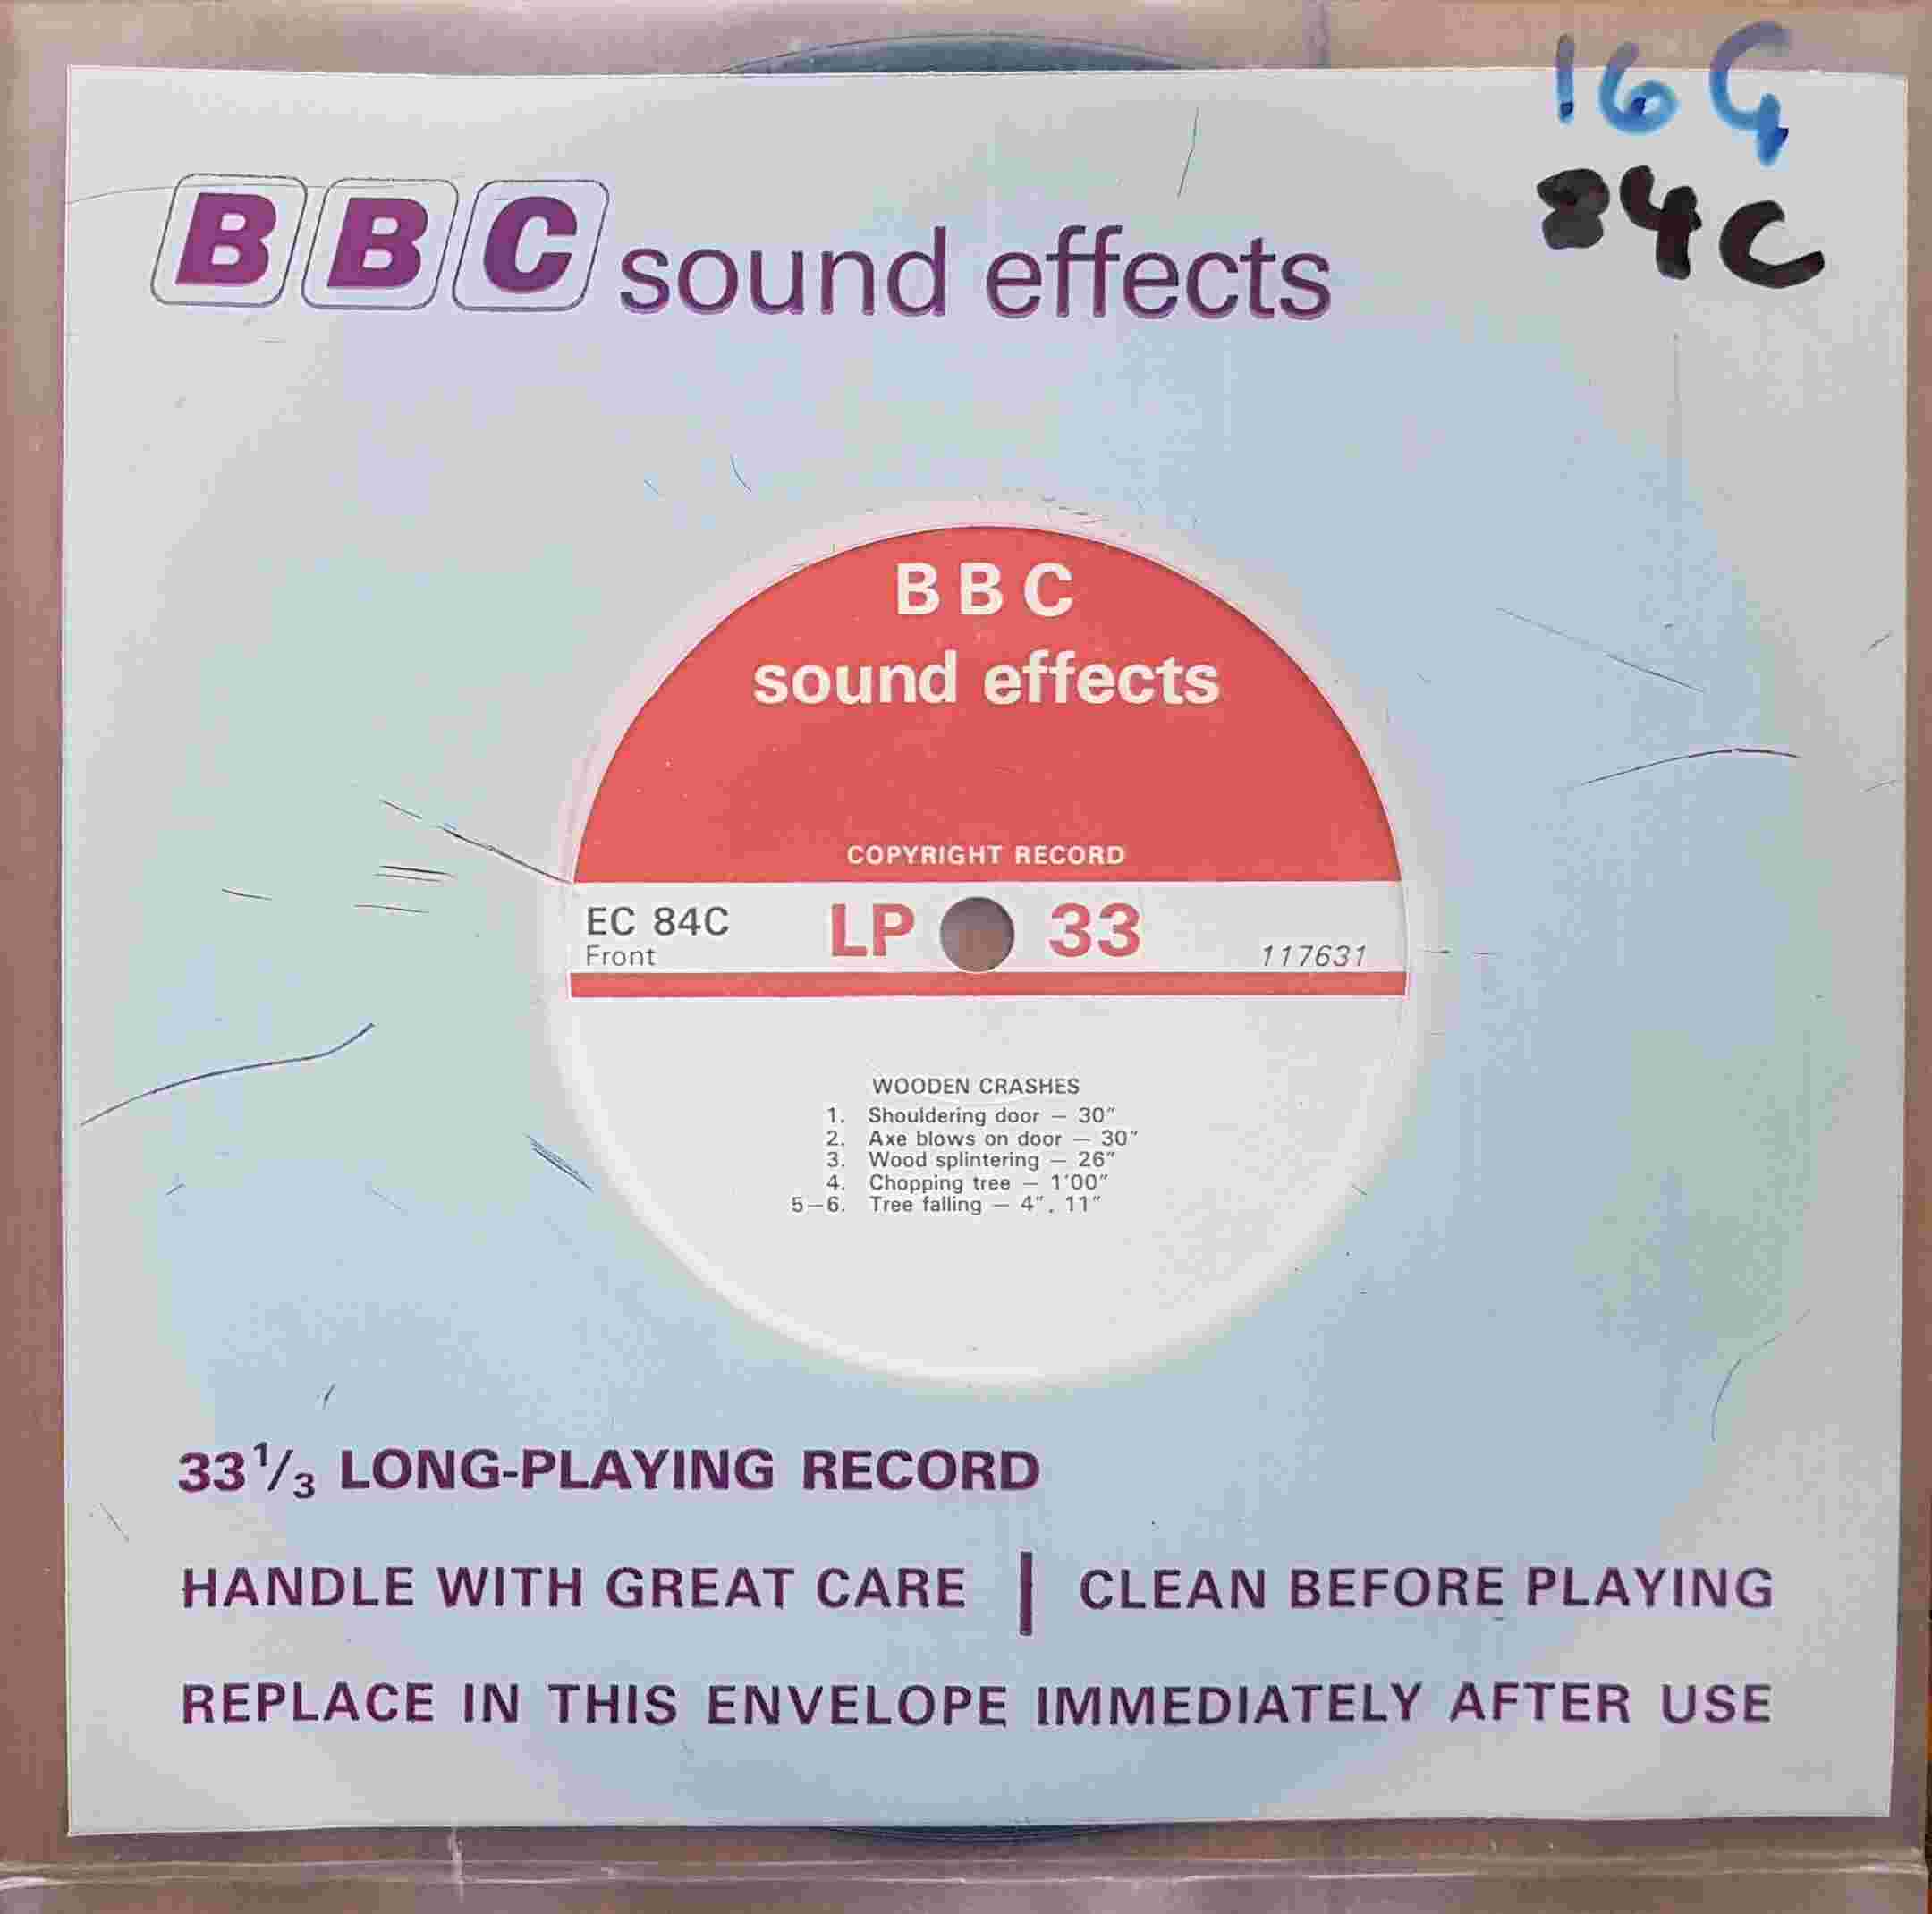 Picture of EC 84C Wooden crashes by artist Not registered from the BBC singles - Records and Tapes library